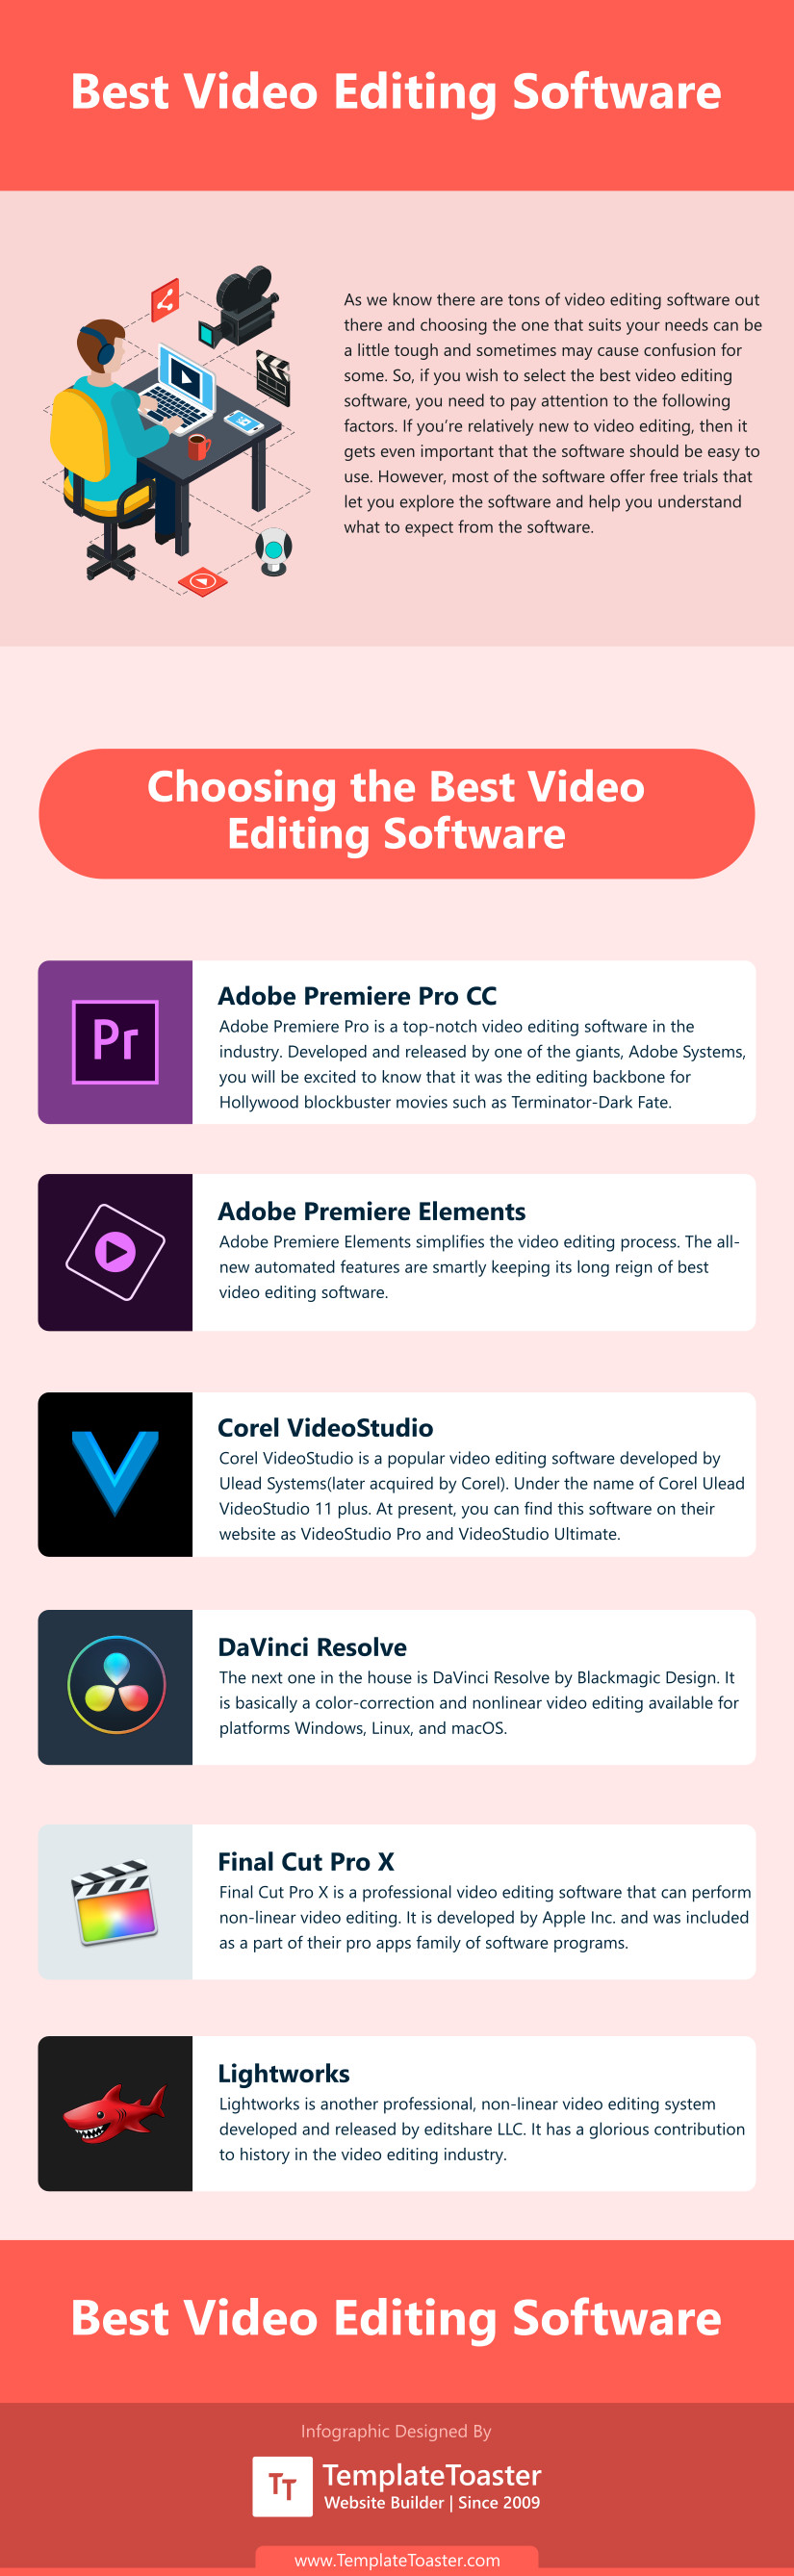 Best Video Editing Software compared